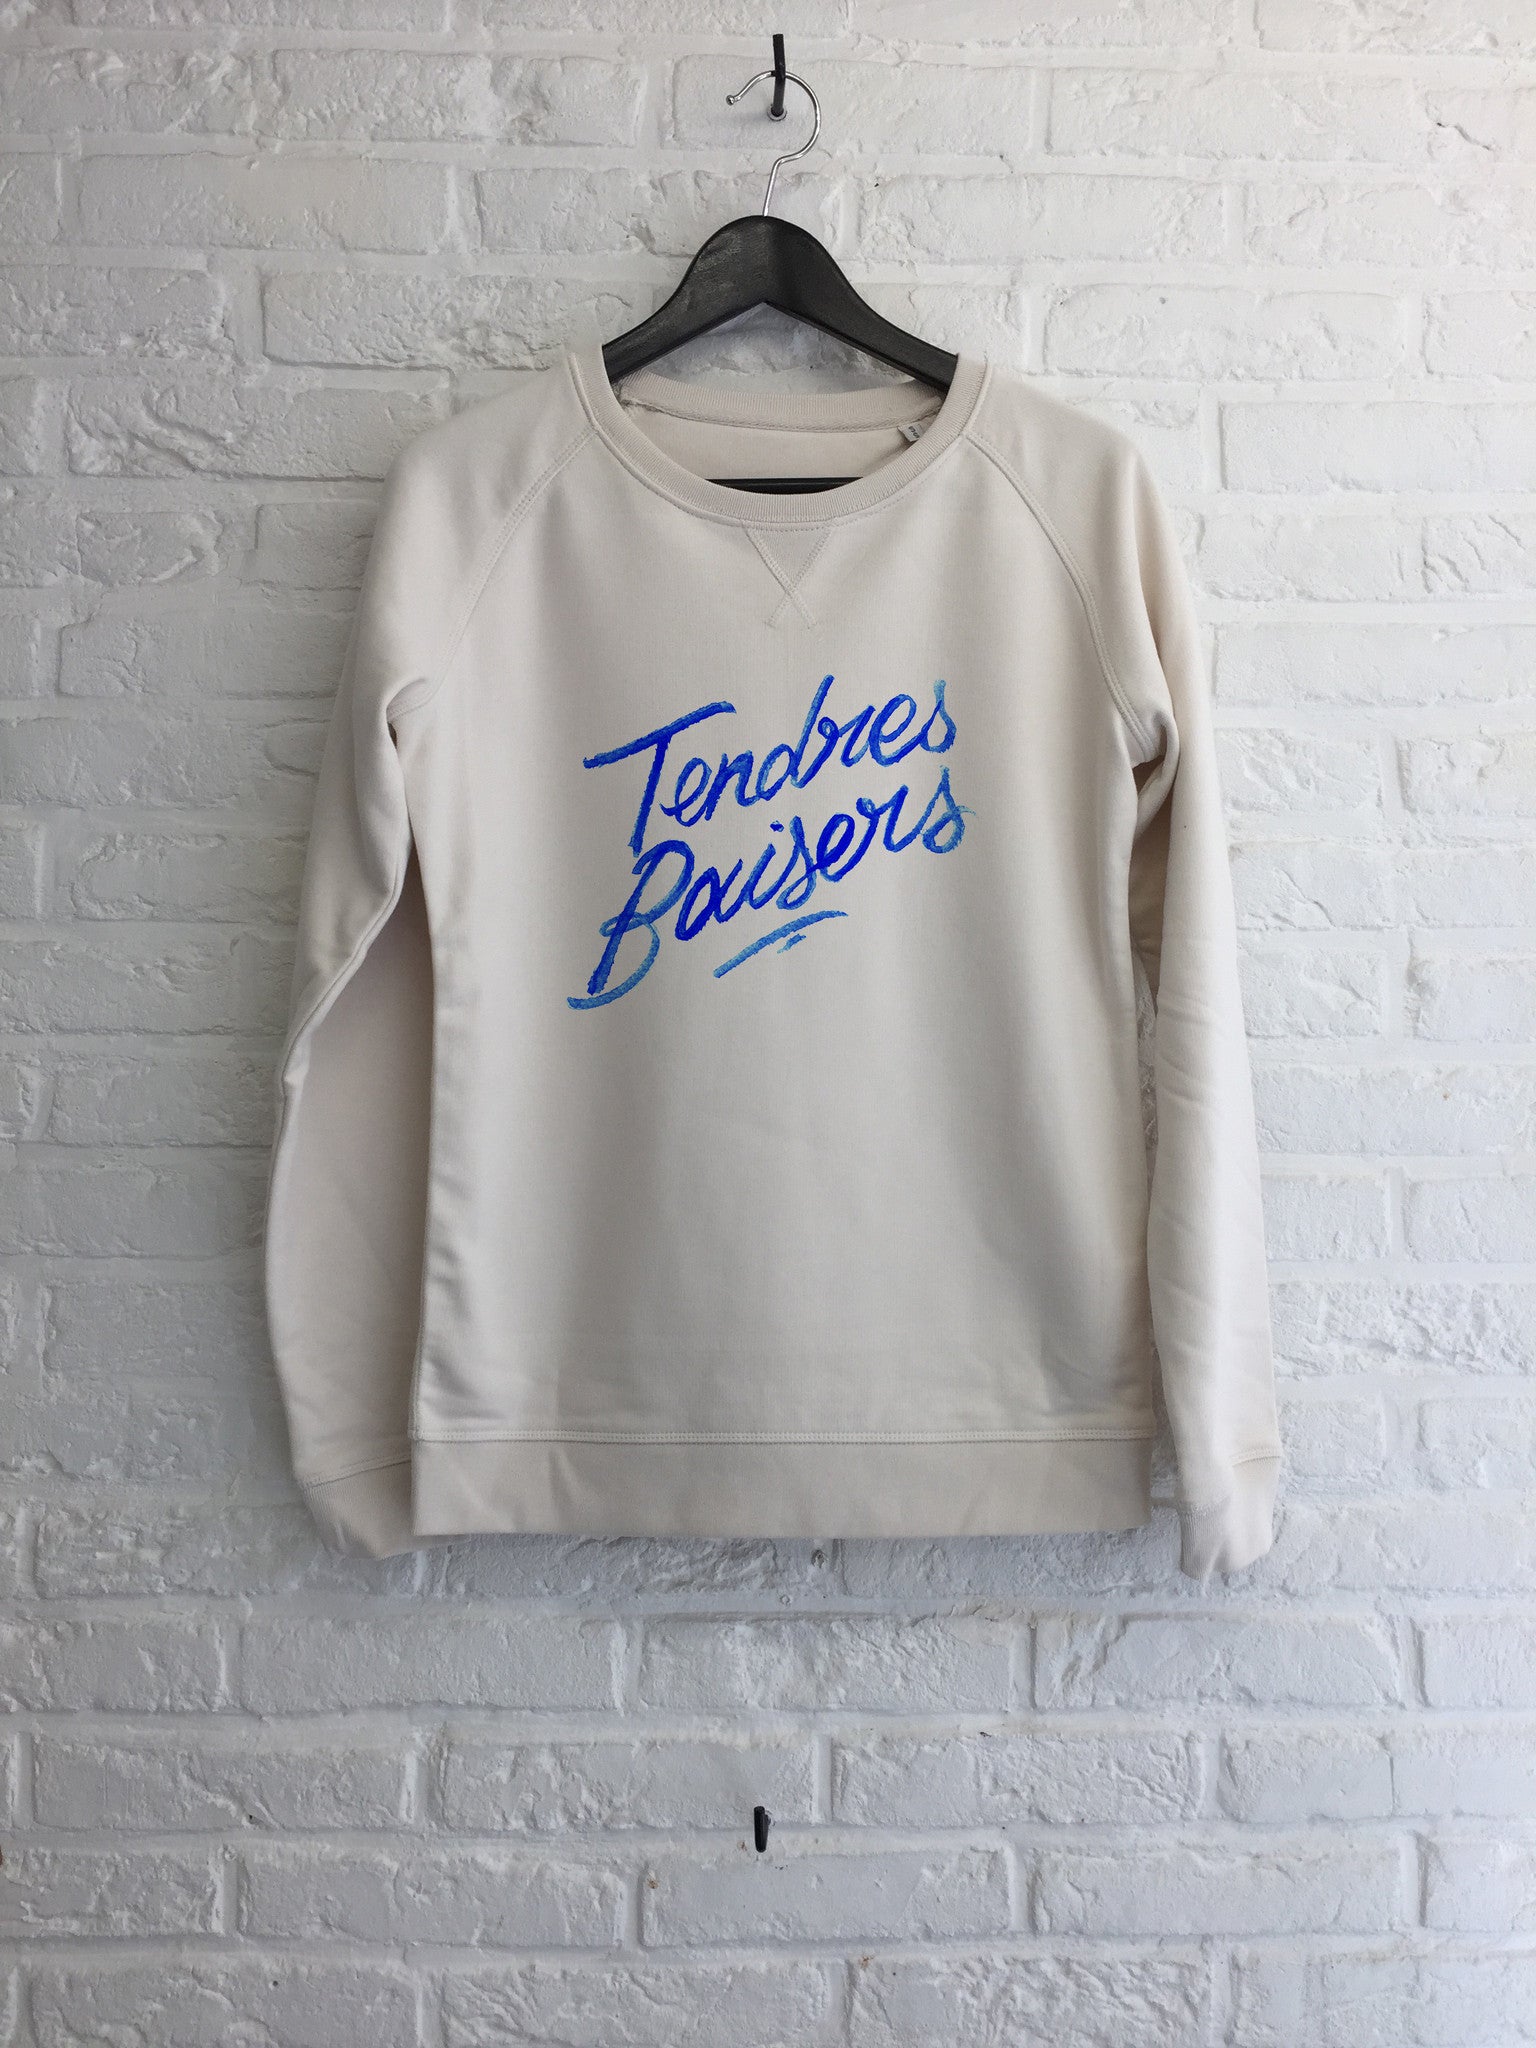 TH Gallery - Tendres baisers - Sweat - Femme-Sweat shirts-Atelier Amelot